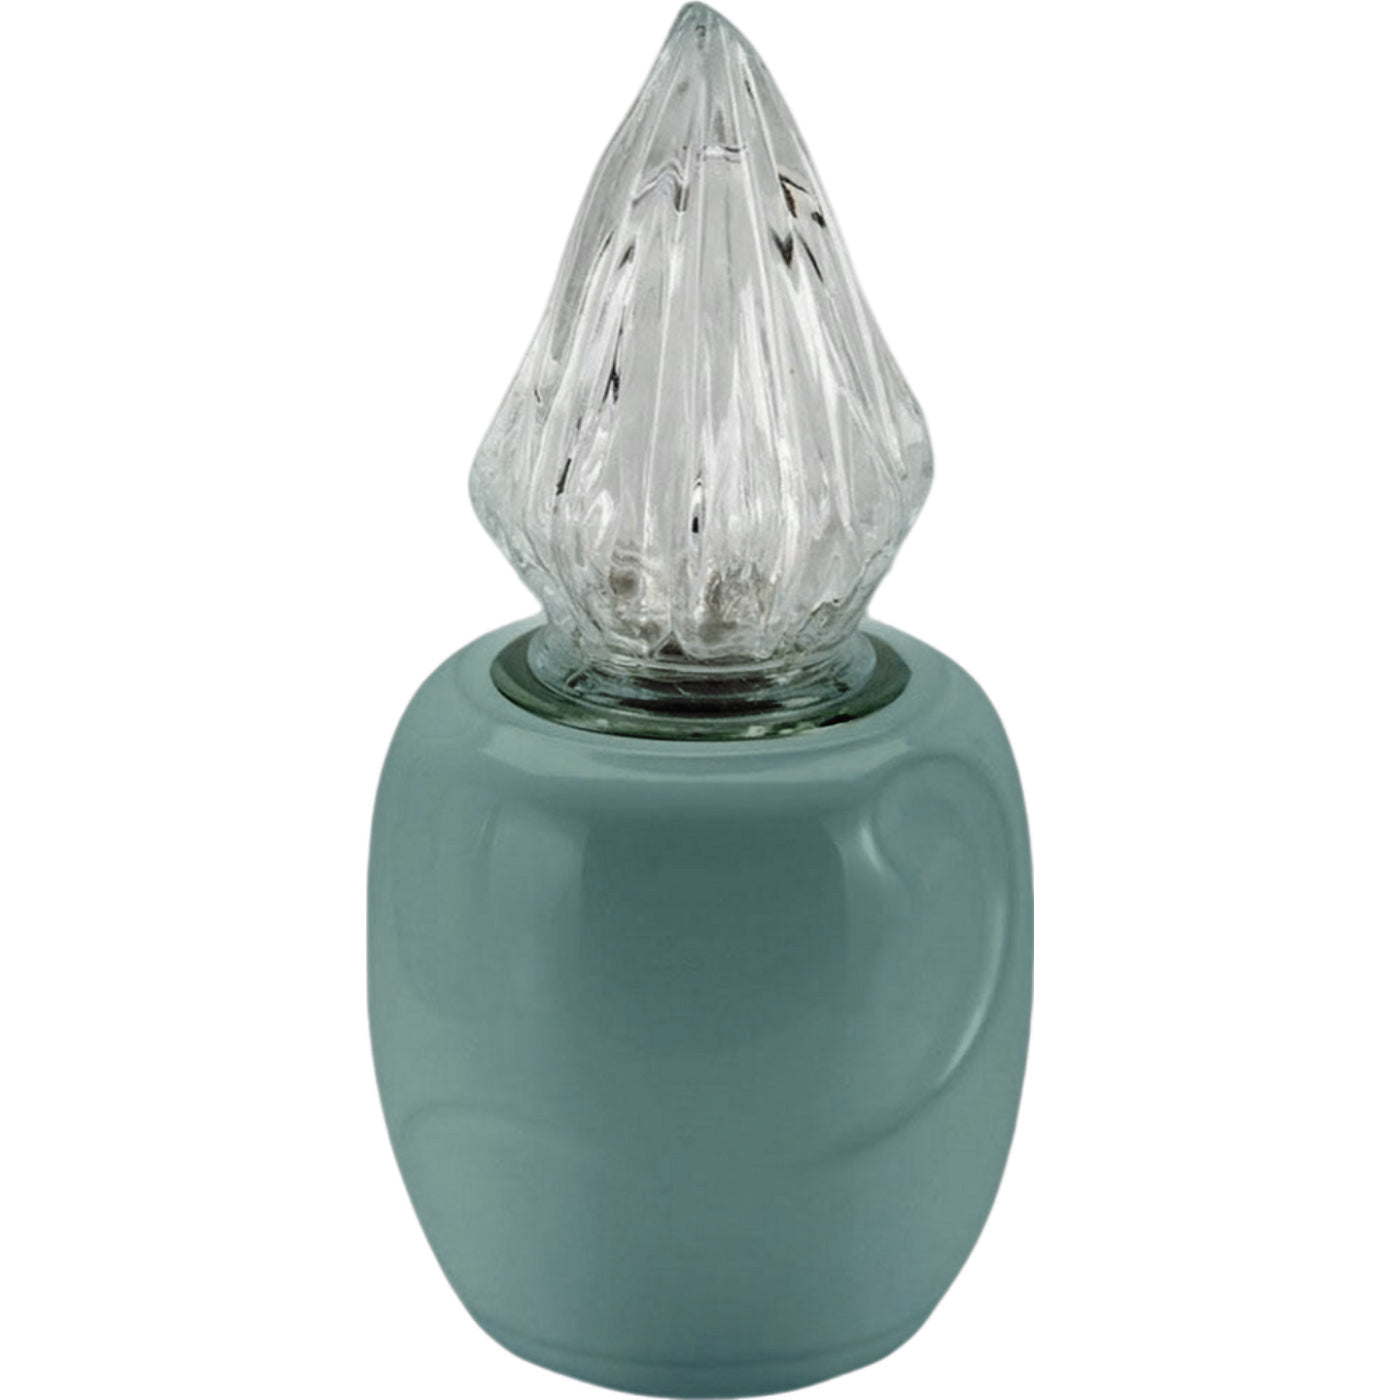 Grave light Sharon green 10x10cm - 3.9x3.9in In green porcelain, ground attached SH126T/V